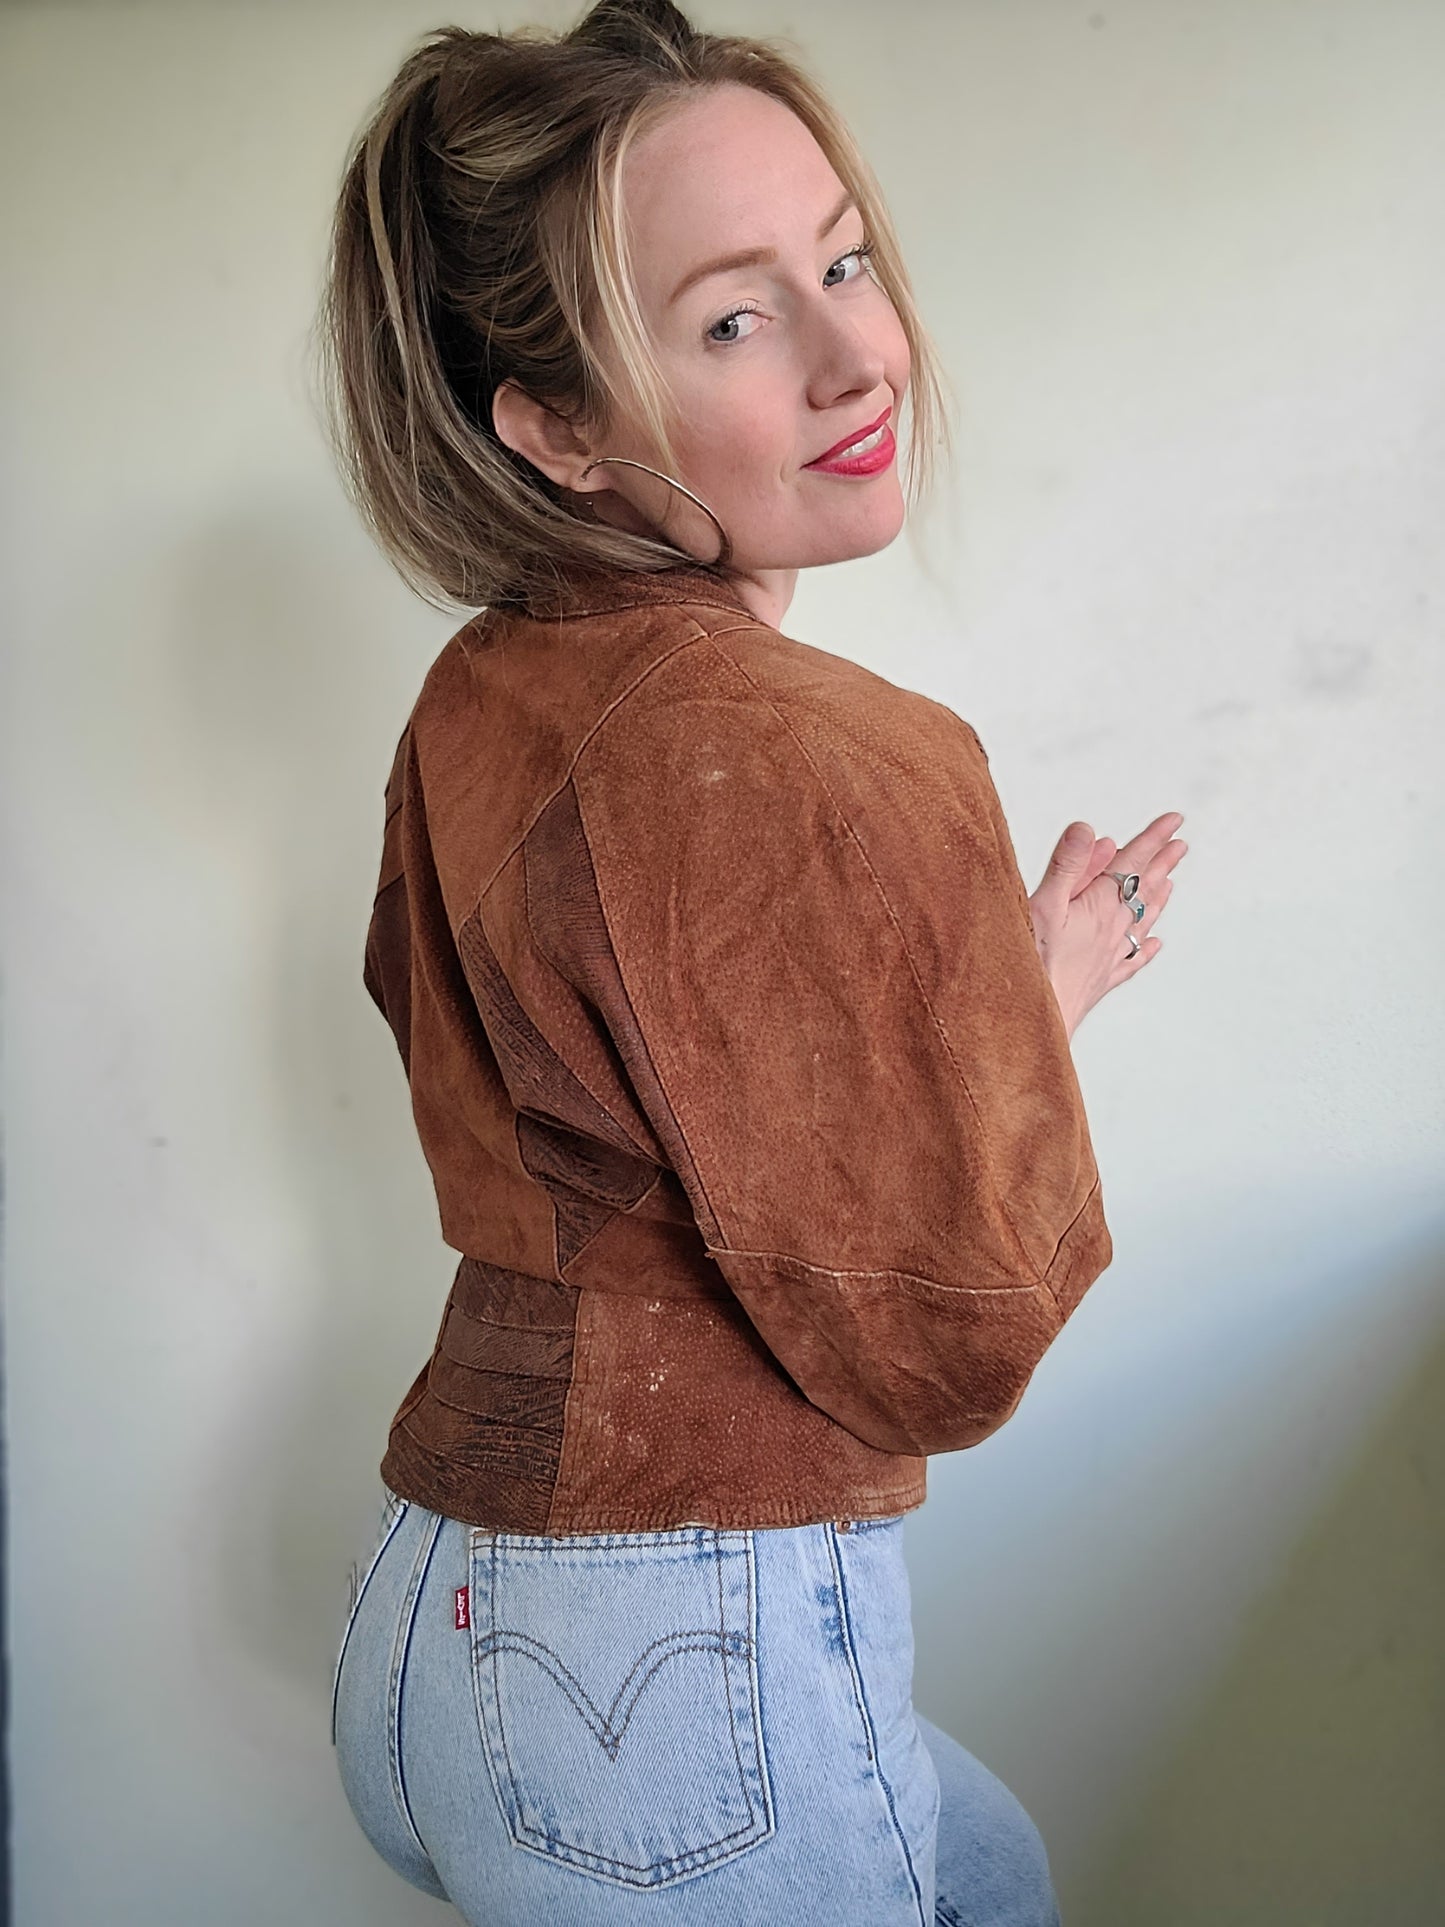 The Crystal Vintage 80s Cropped Leather Jacket S